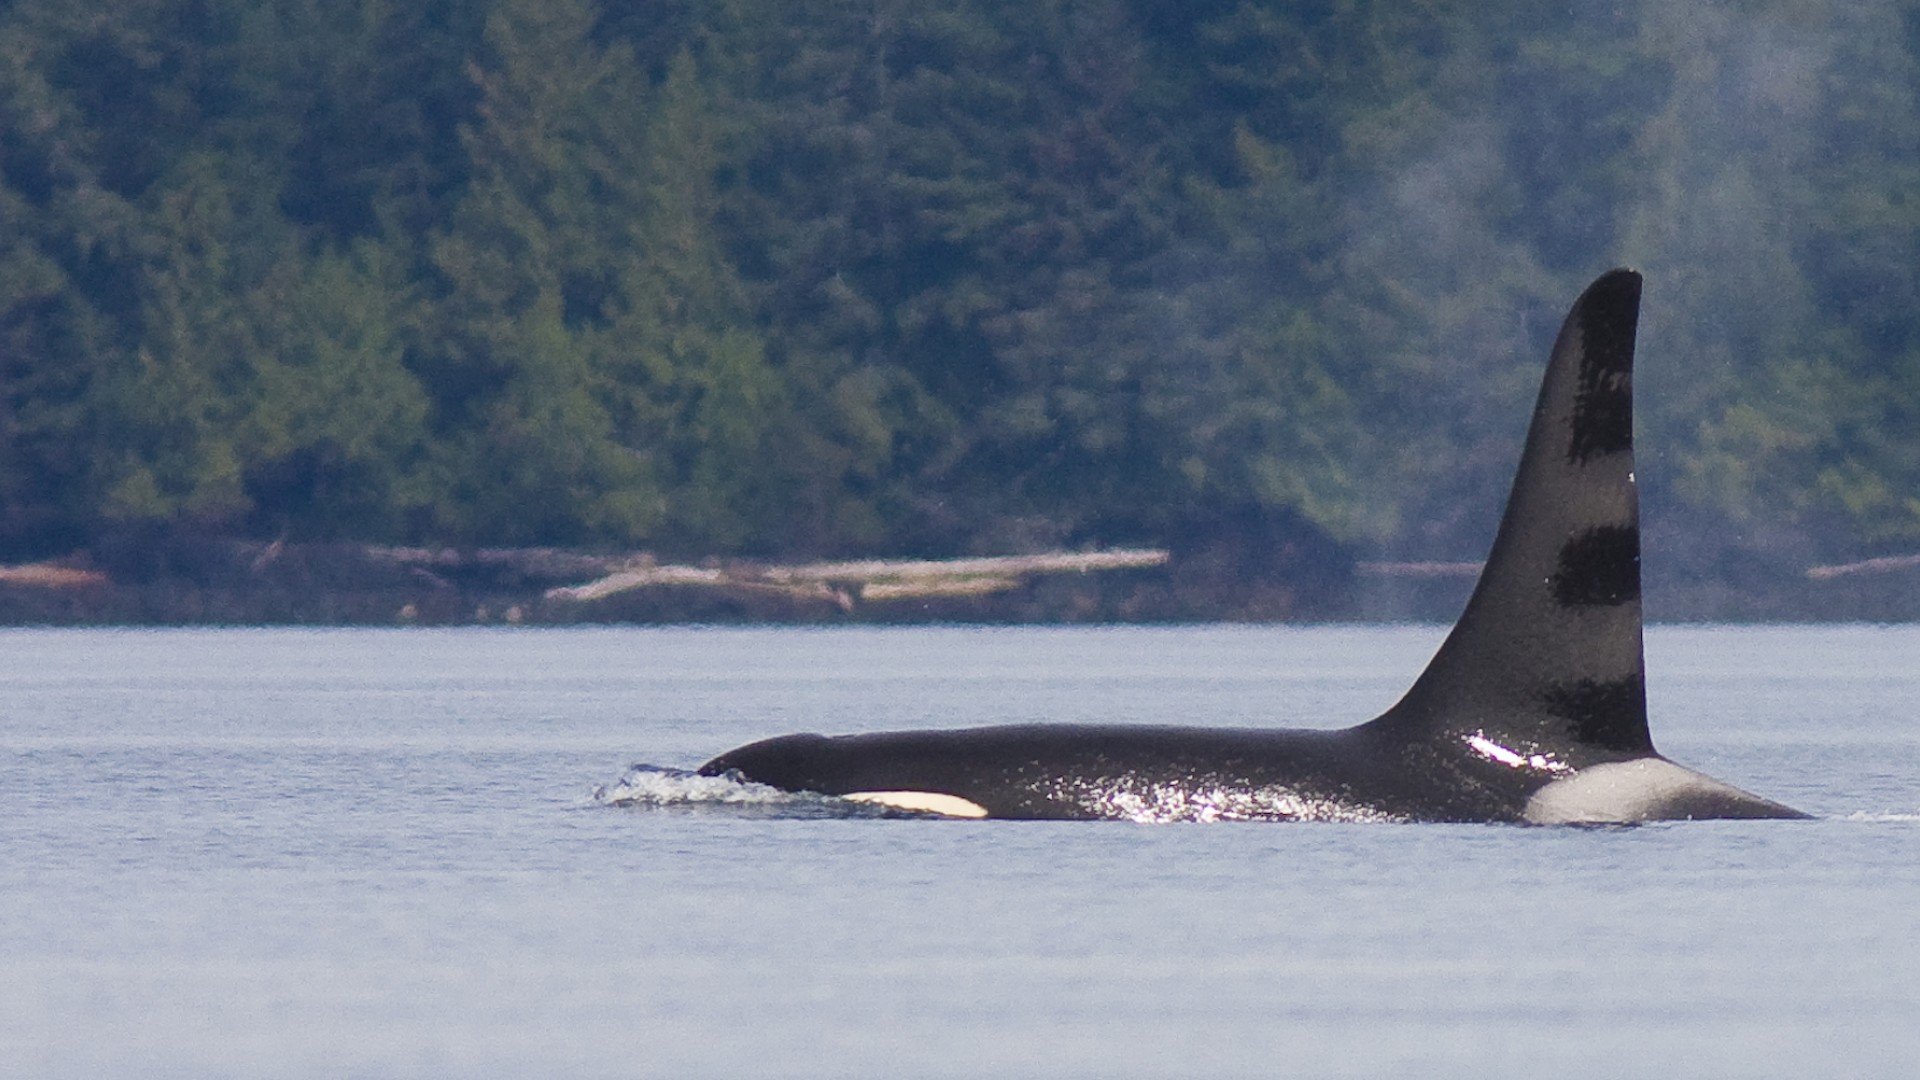 Orca whale breaching the surface of the water with dense trees behind it in British Columbia